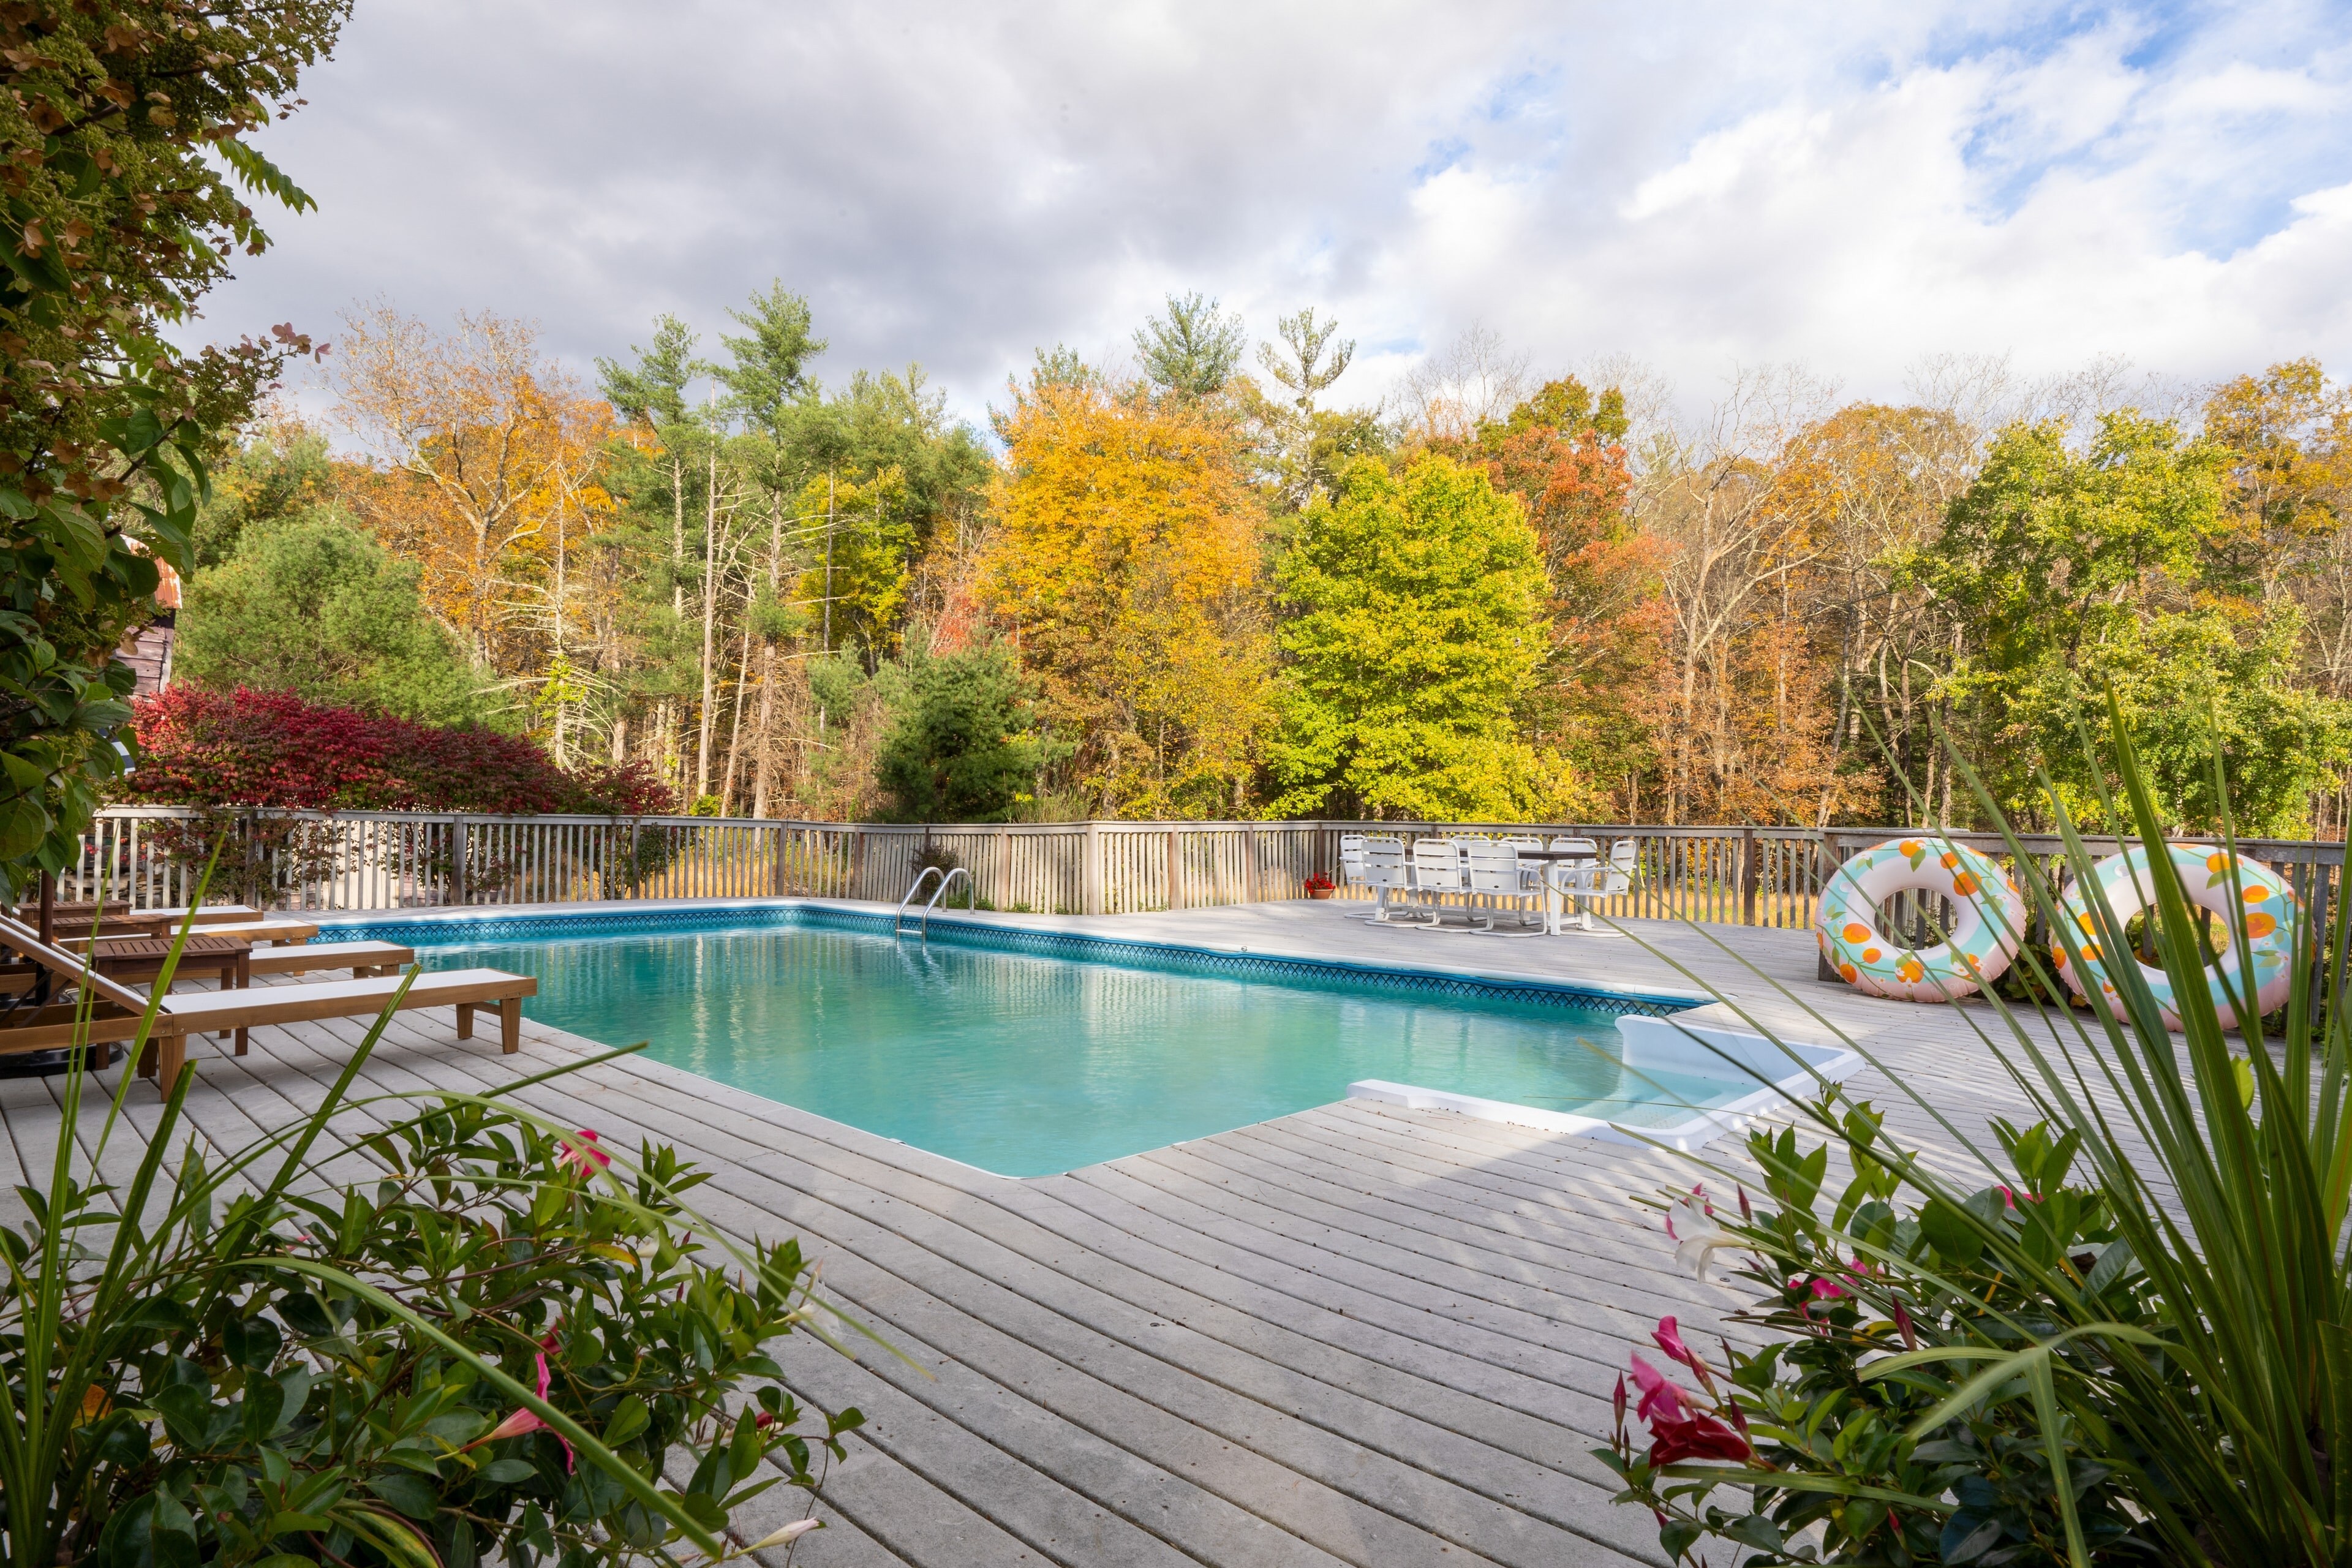 Gorgeous fall colors over the pool.